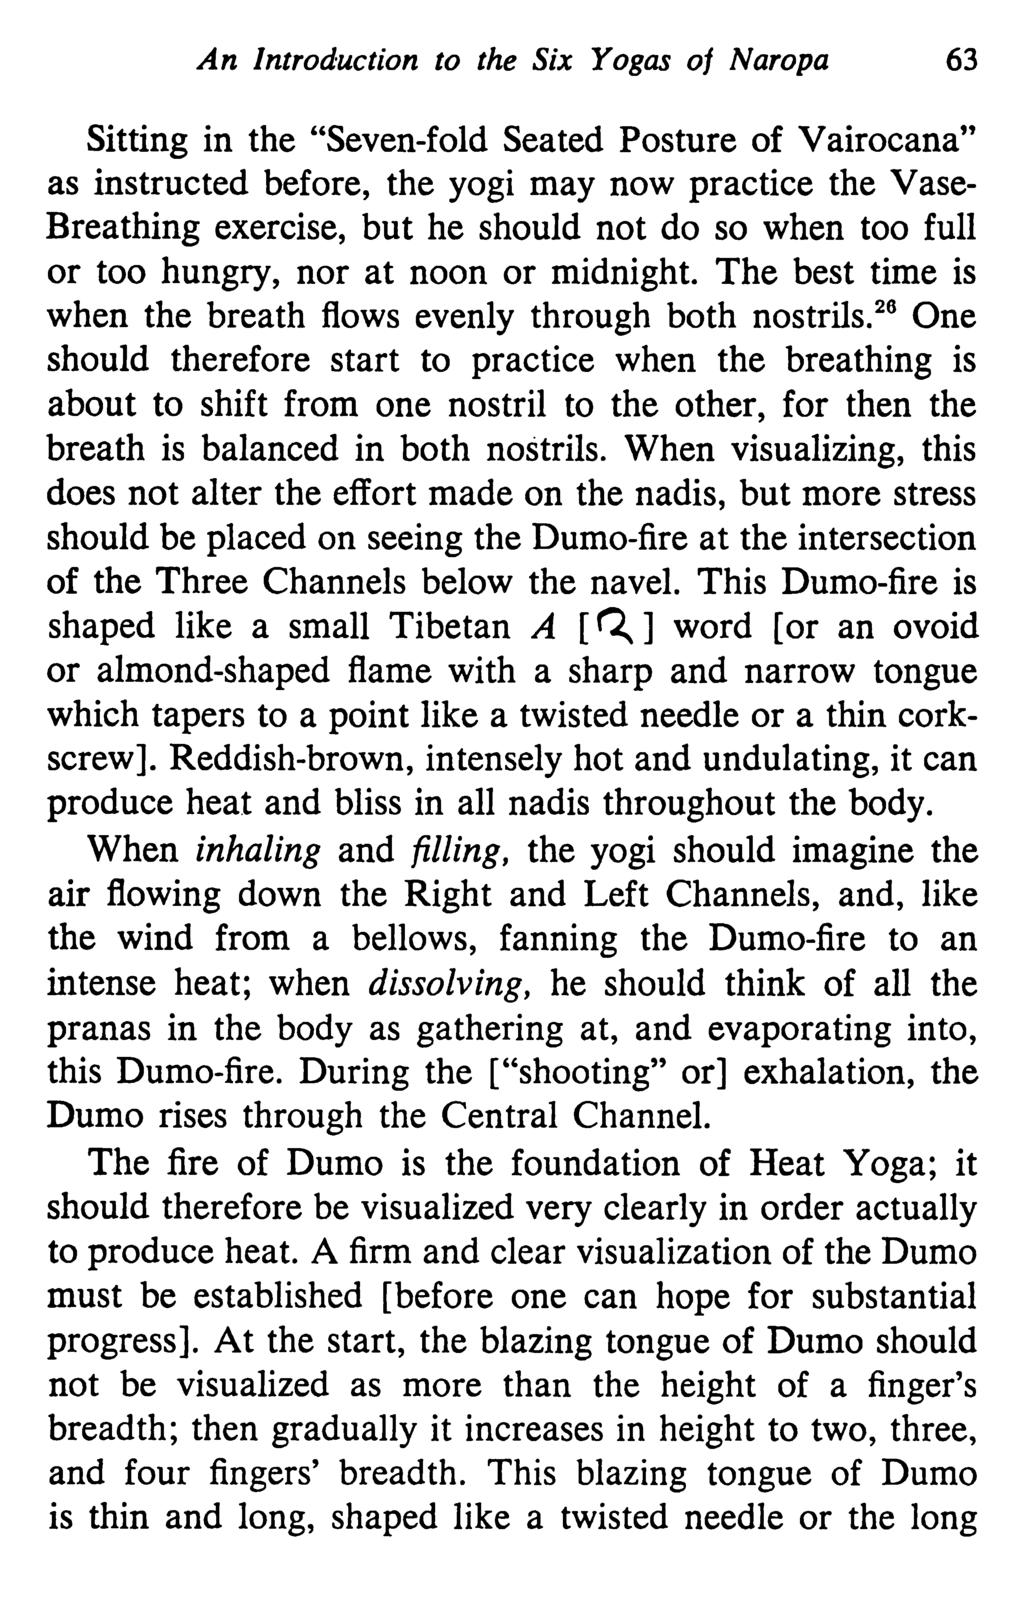 An Introduction to the Six Yogas of Naropa 63 Sitting in the "Seven-fold Seated Posture of Vairocana" as instructed before, the yogi may now practice the Vase Breathing exercise, but he should not do